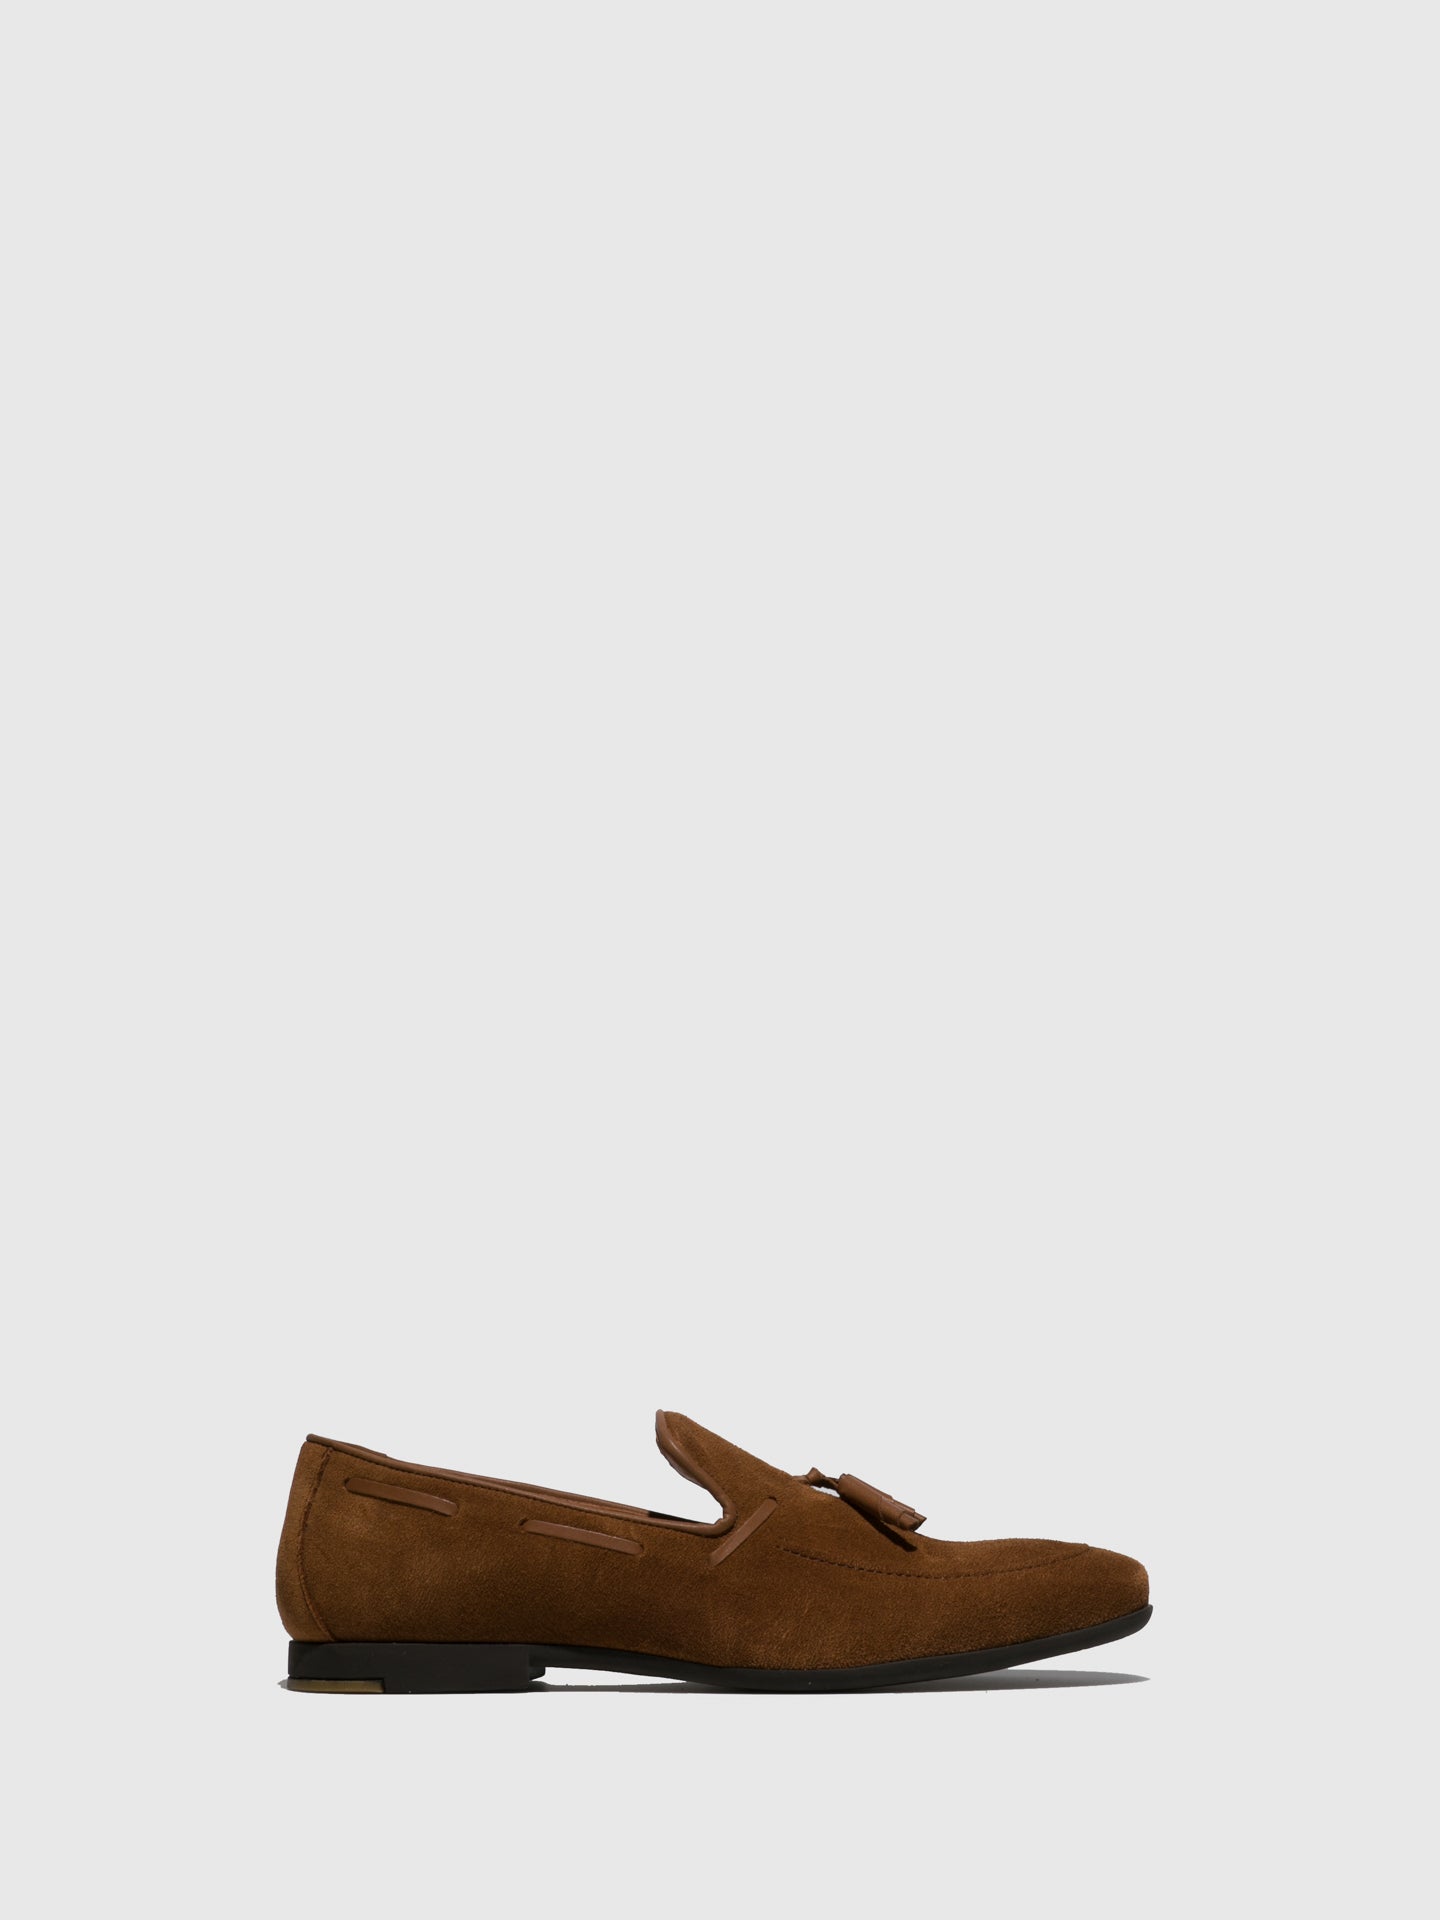 Foreva Brown Loafers Shoes